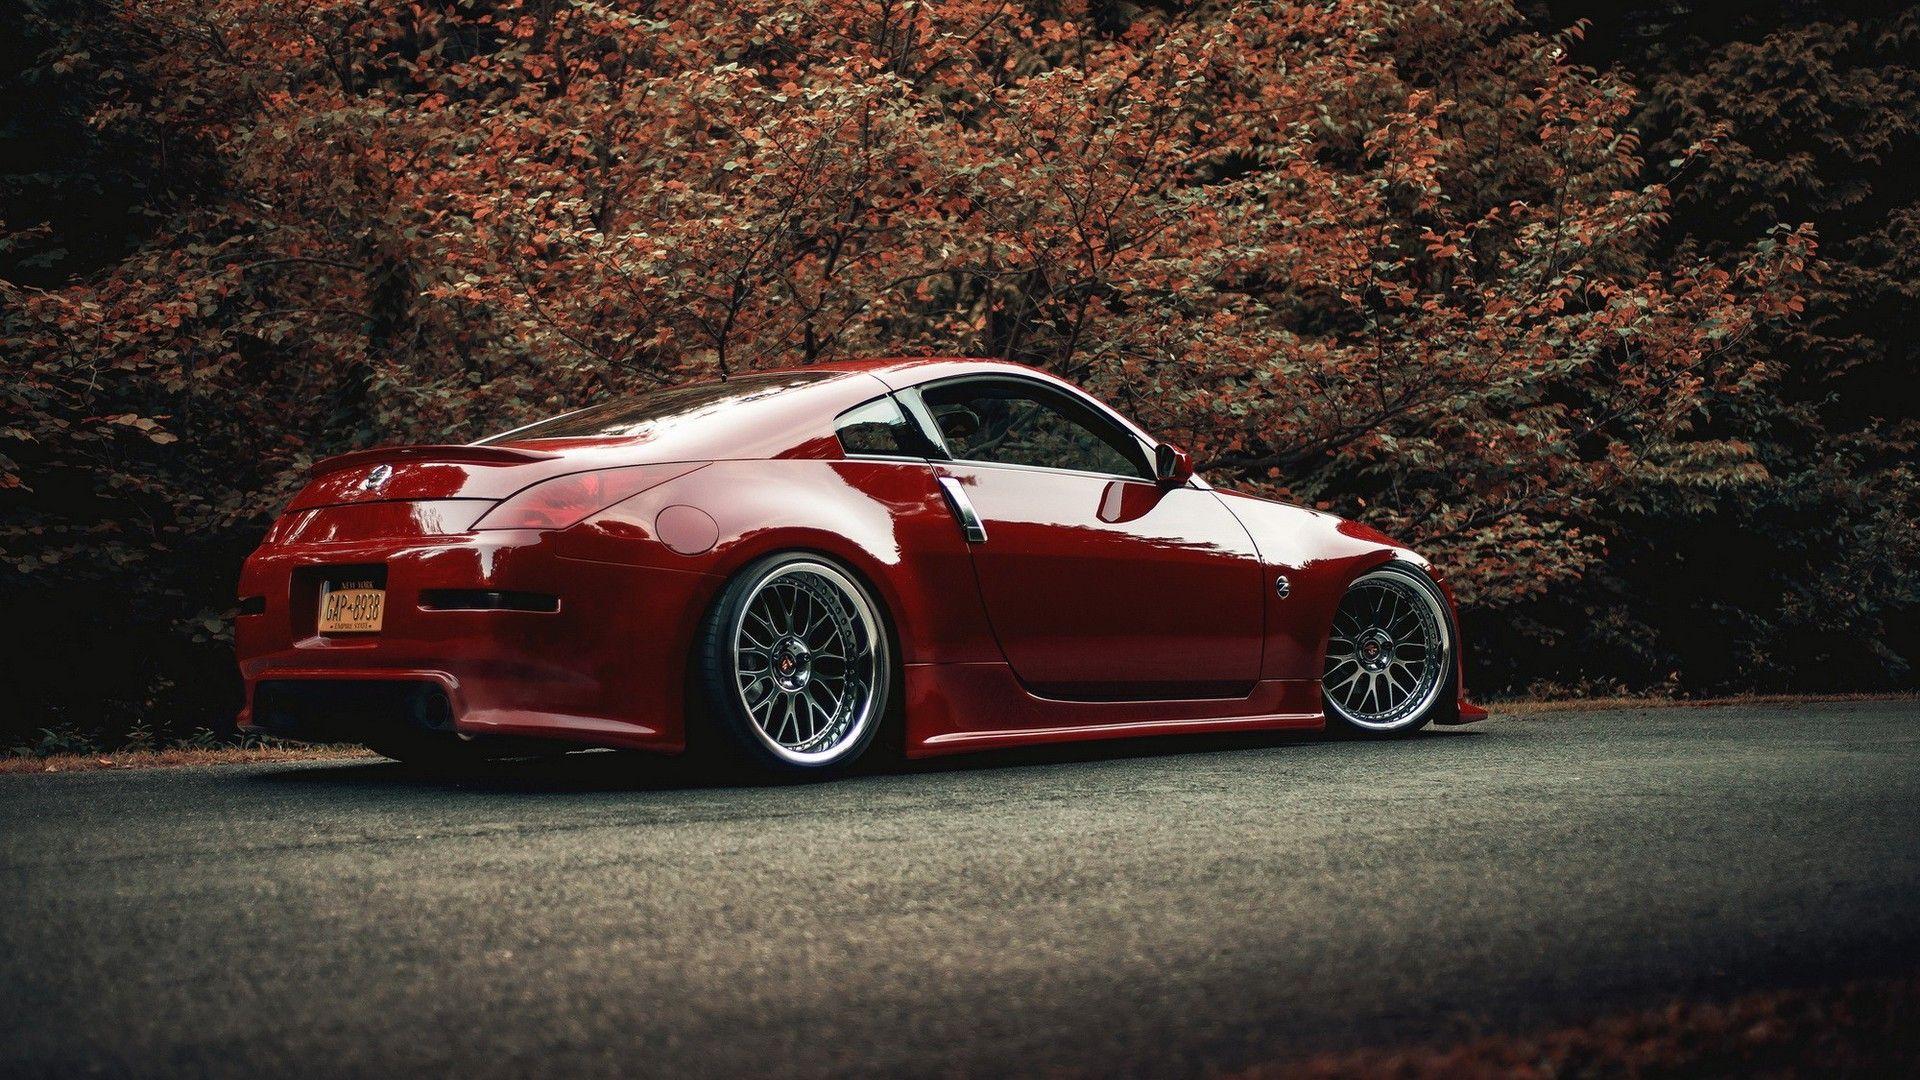 Nissan 350z cars red tuning wallpaper. PC